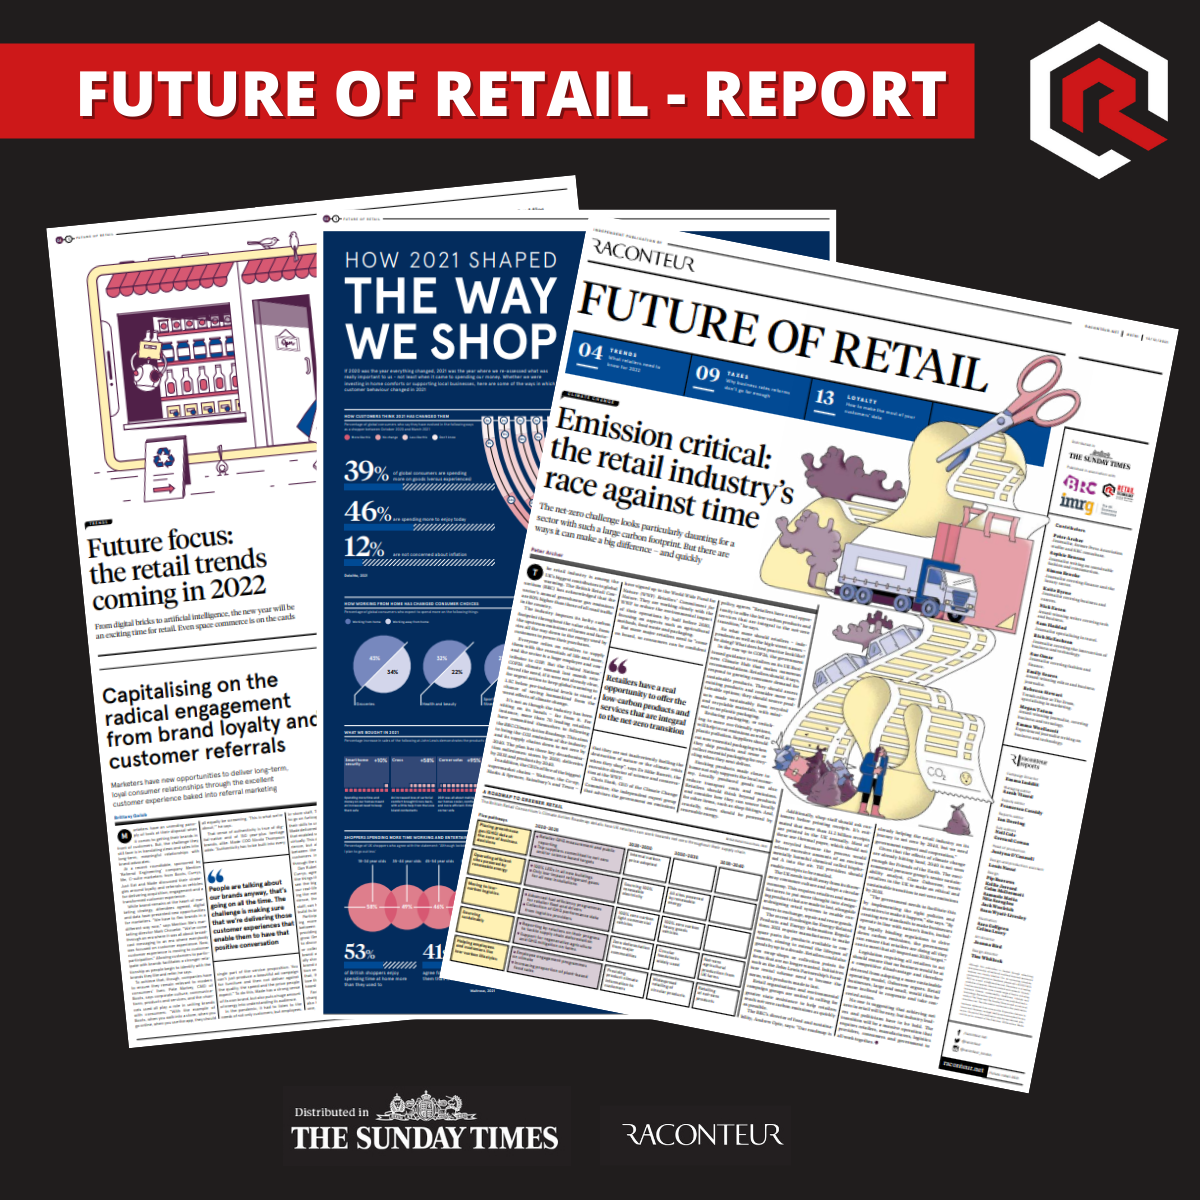 The Future of Retail - Report